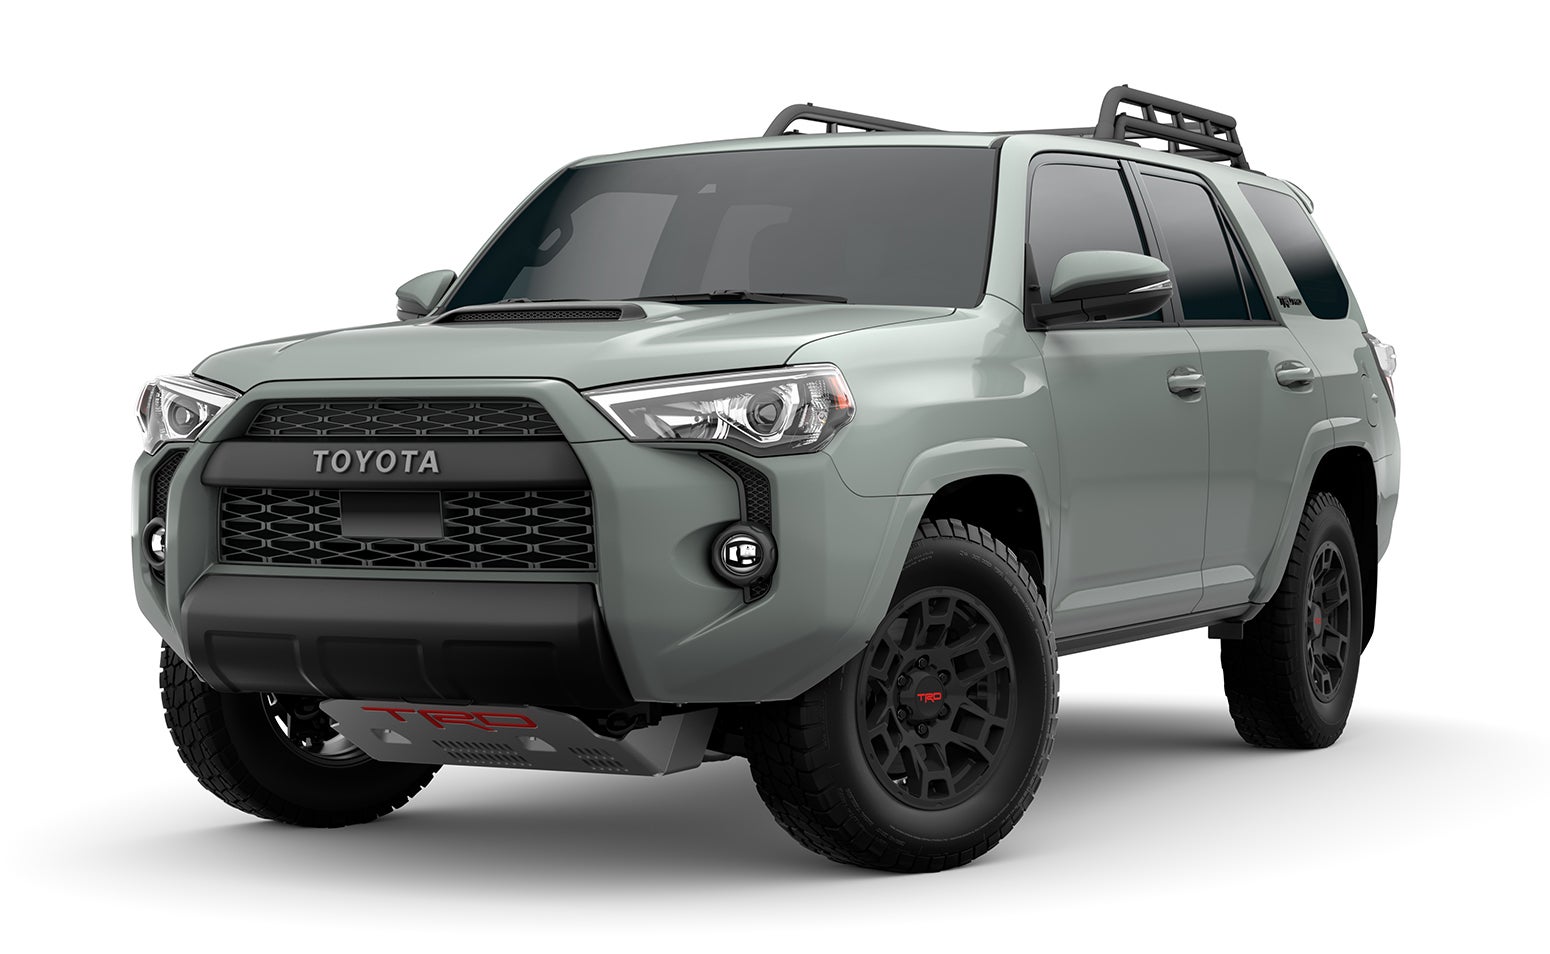 2021 Toyota 4Runner oem parts and accessories on sale